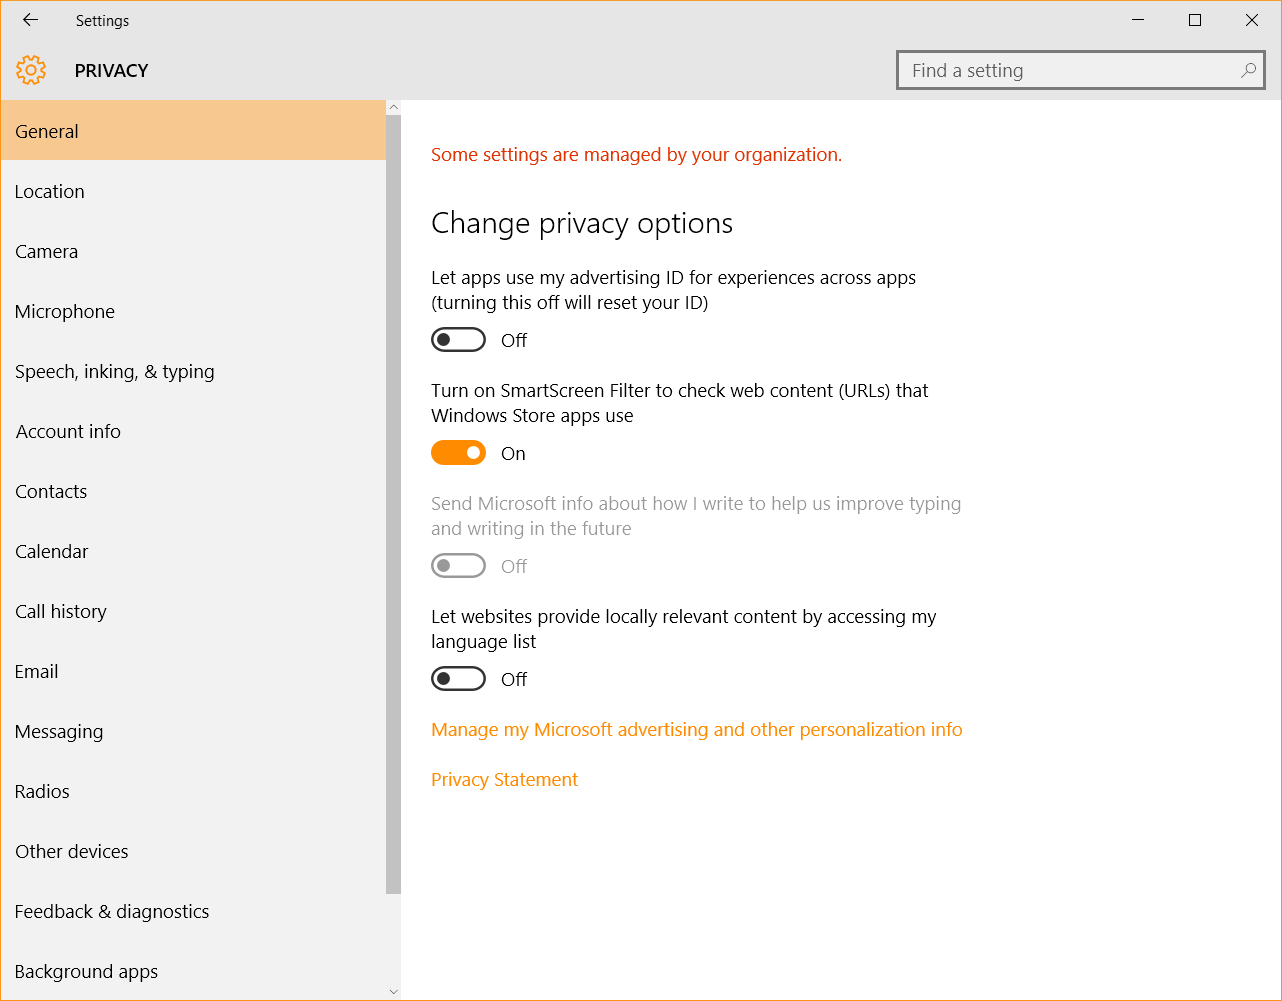 Windows 10 Security Guide - Change Privacy Settings